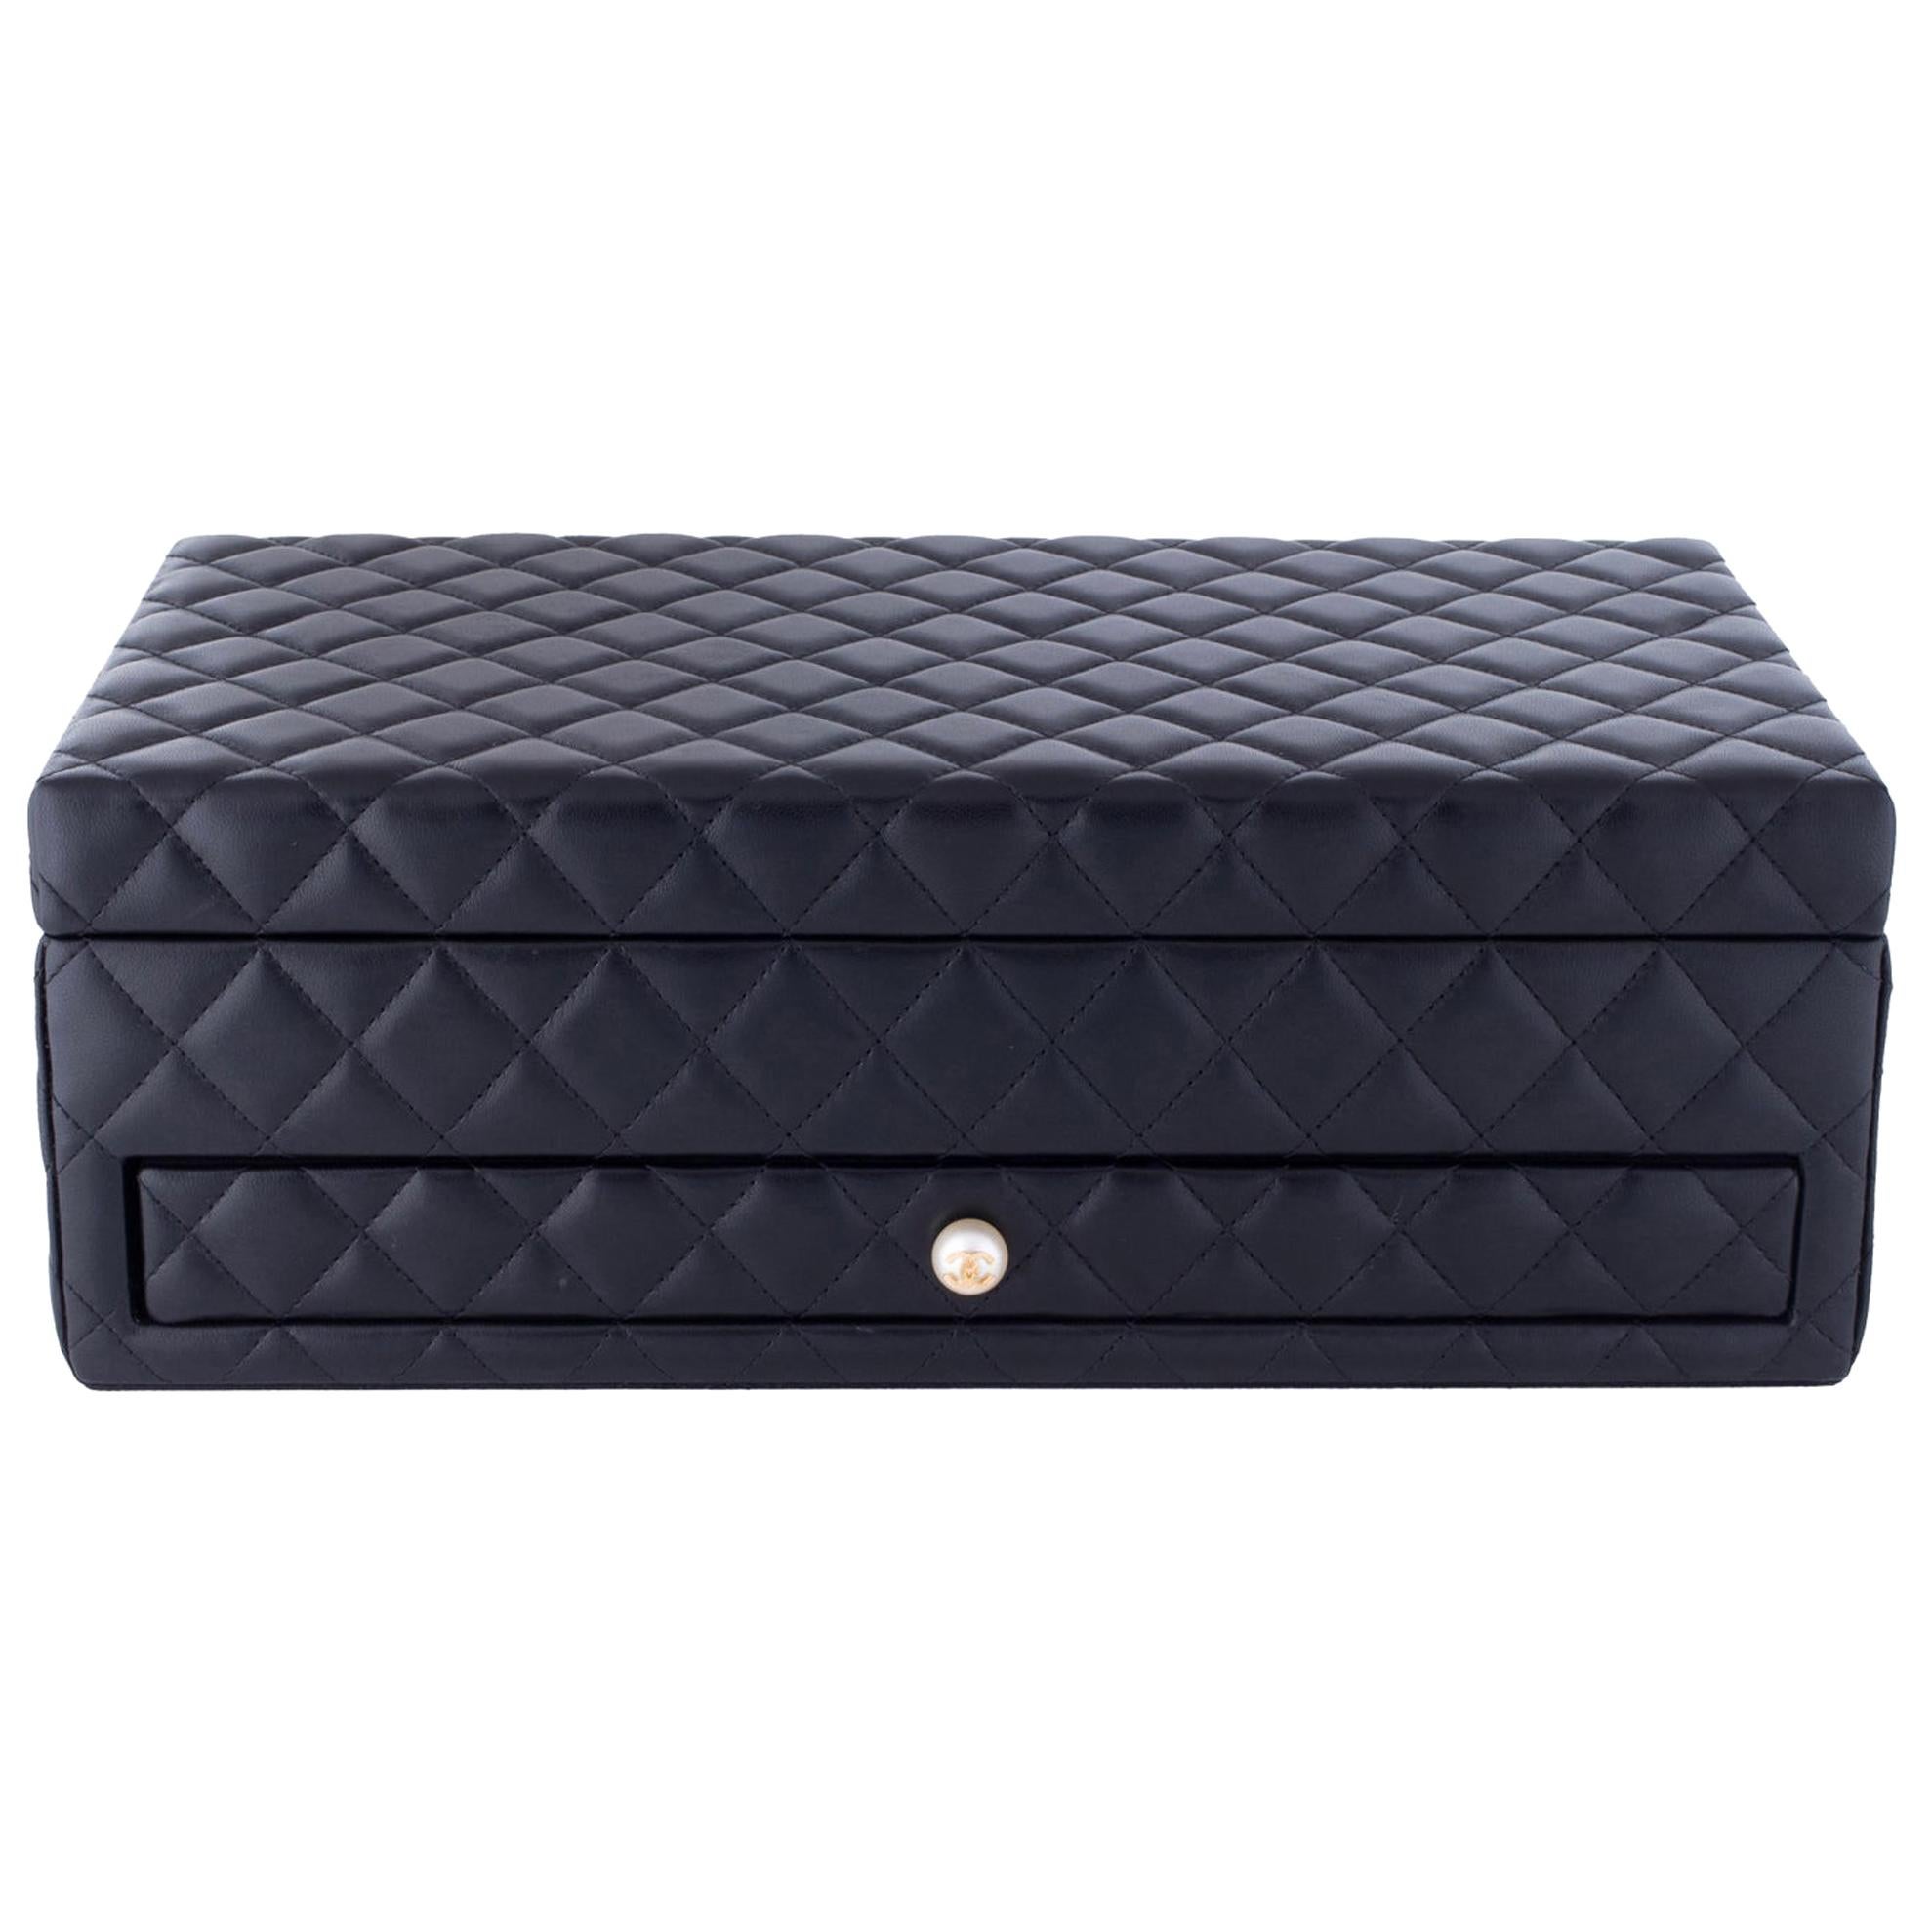 Chanel Quilted Trunk Pearl Limited Edition Rare Home Decor Cosmetic Jewelry Box 